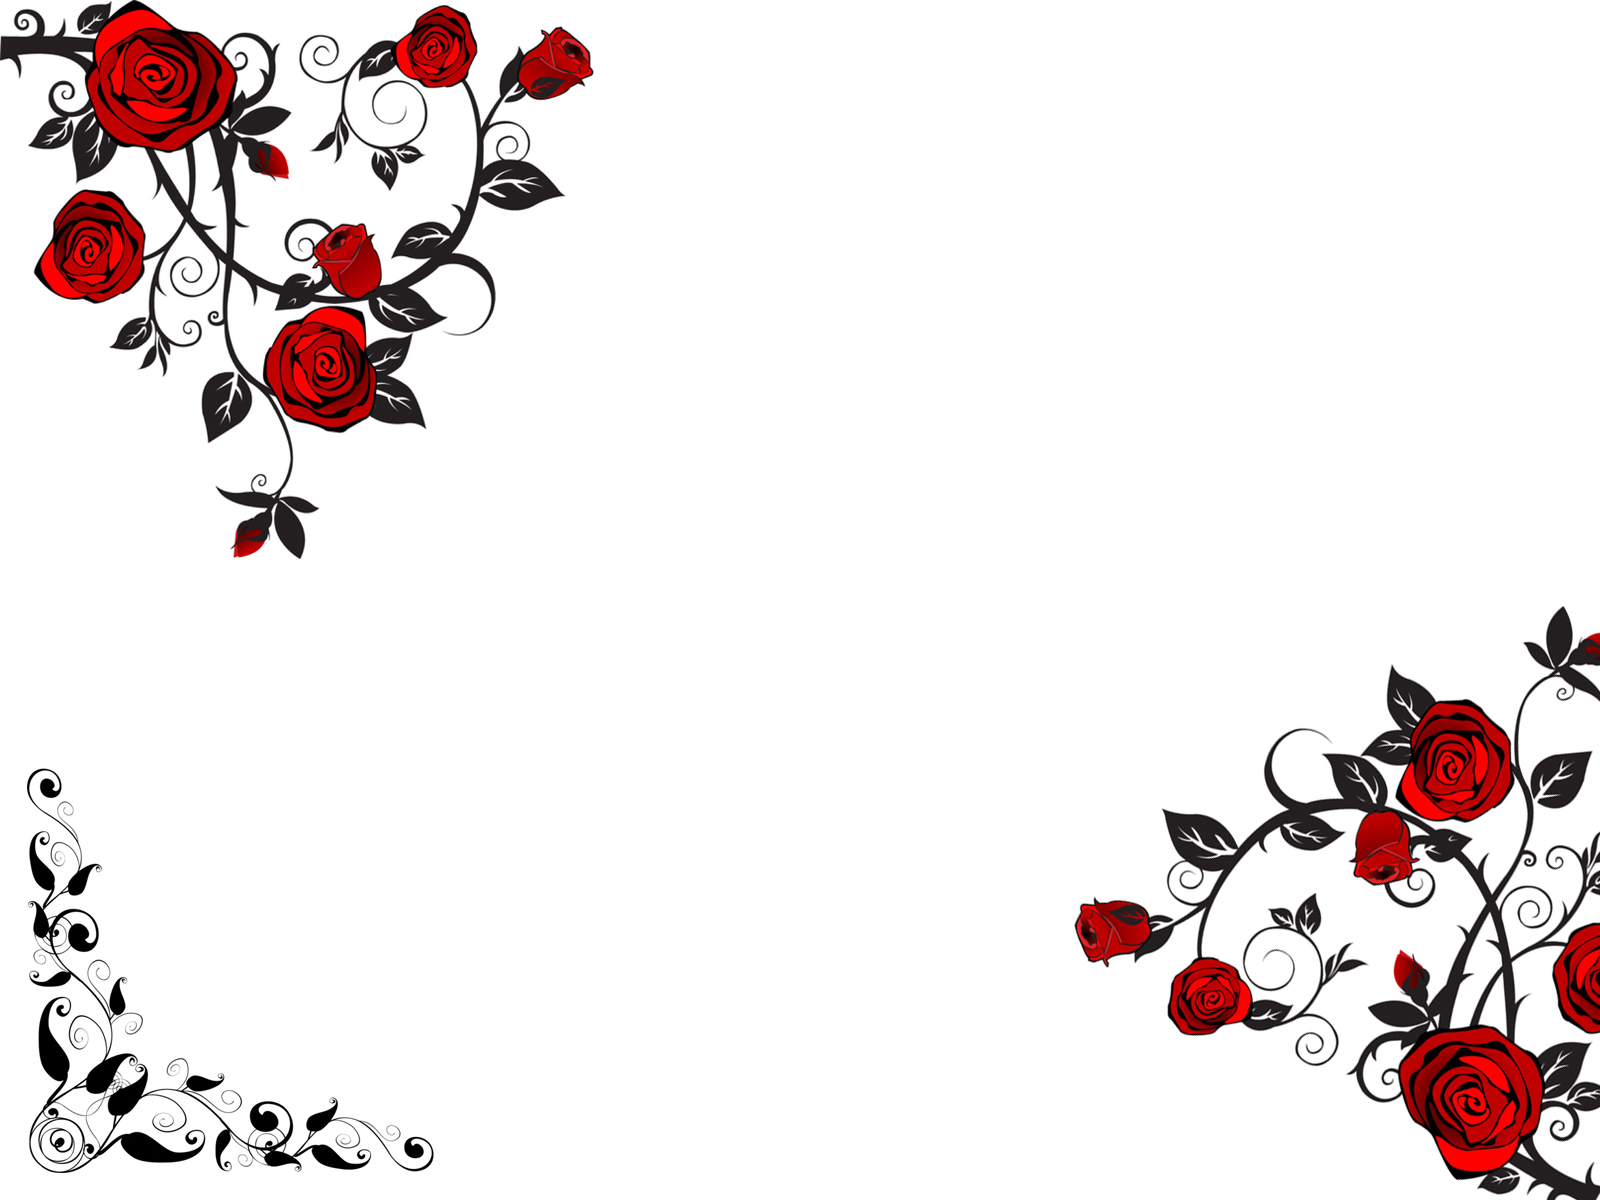 red-rose-flower-backgrounds-black-flowers-red-templates-free-ppt